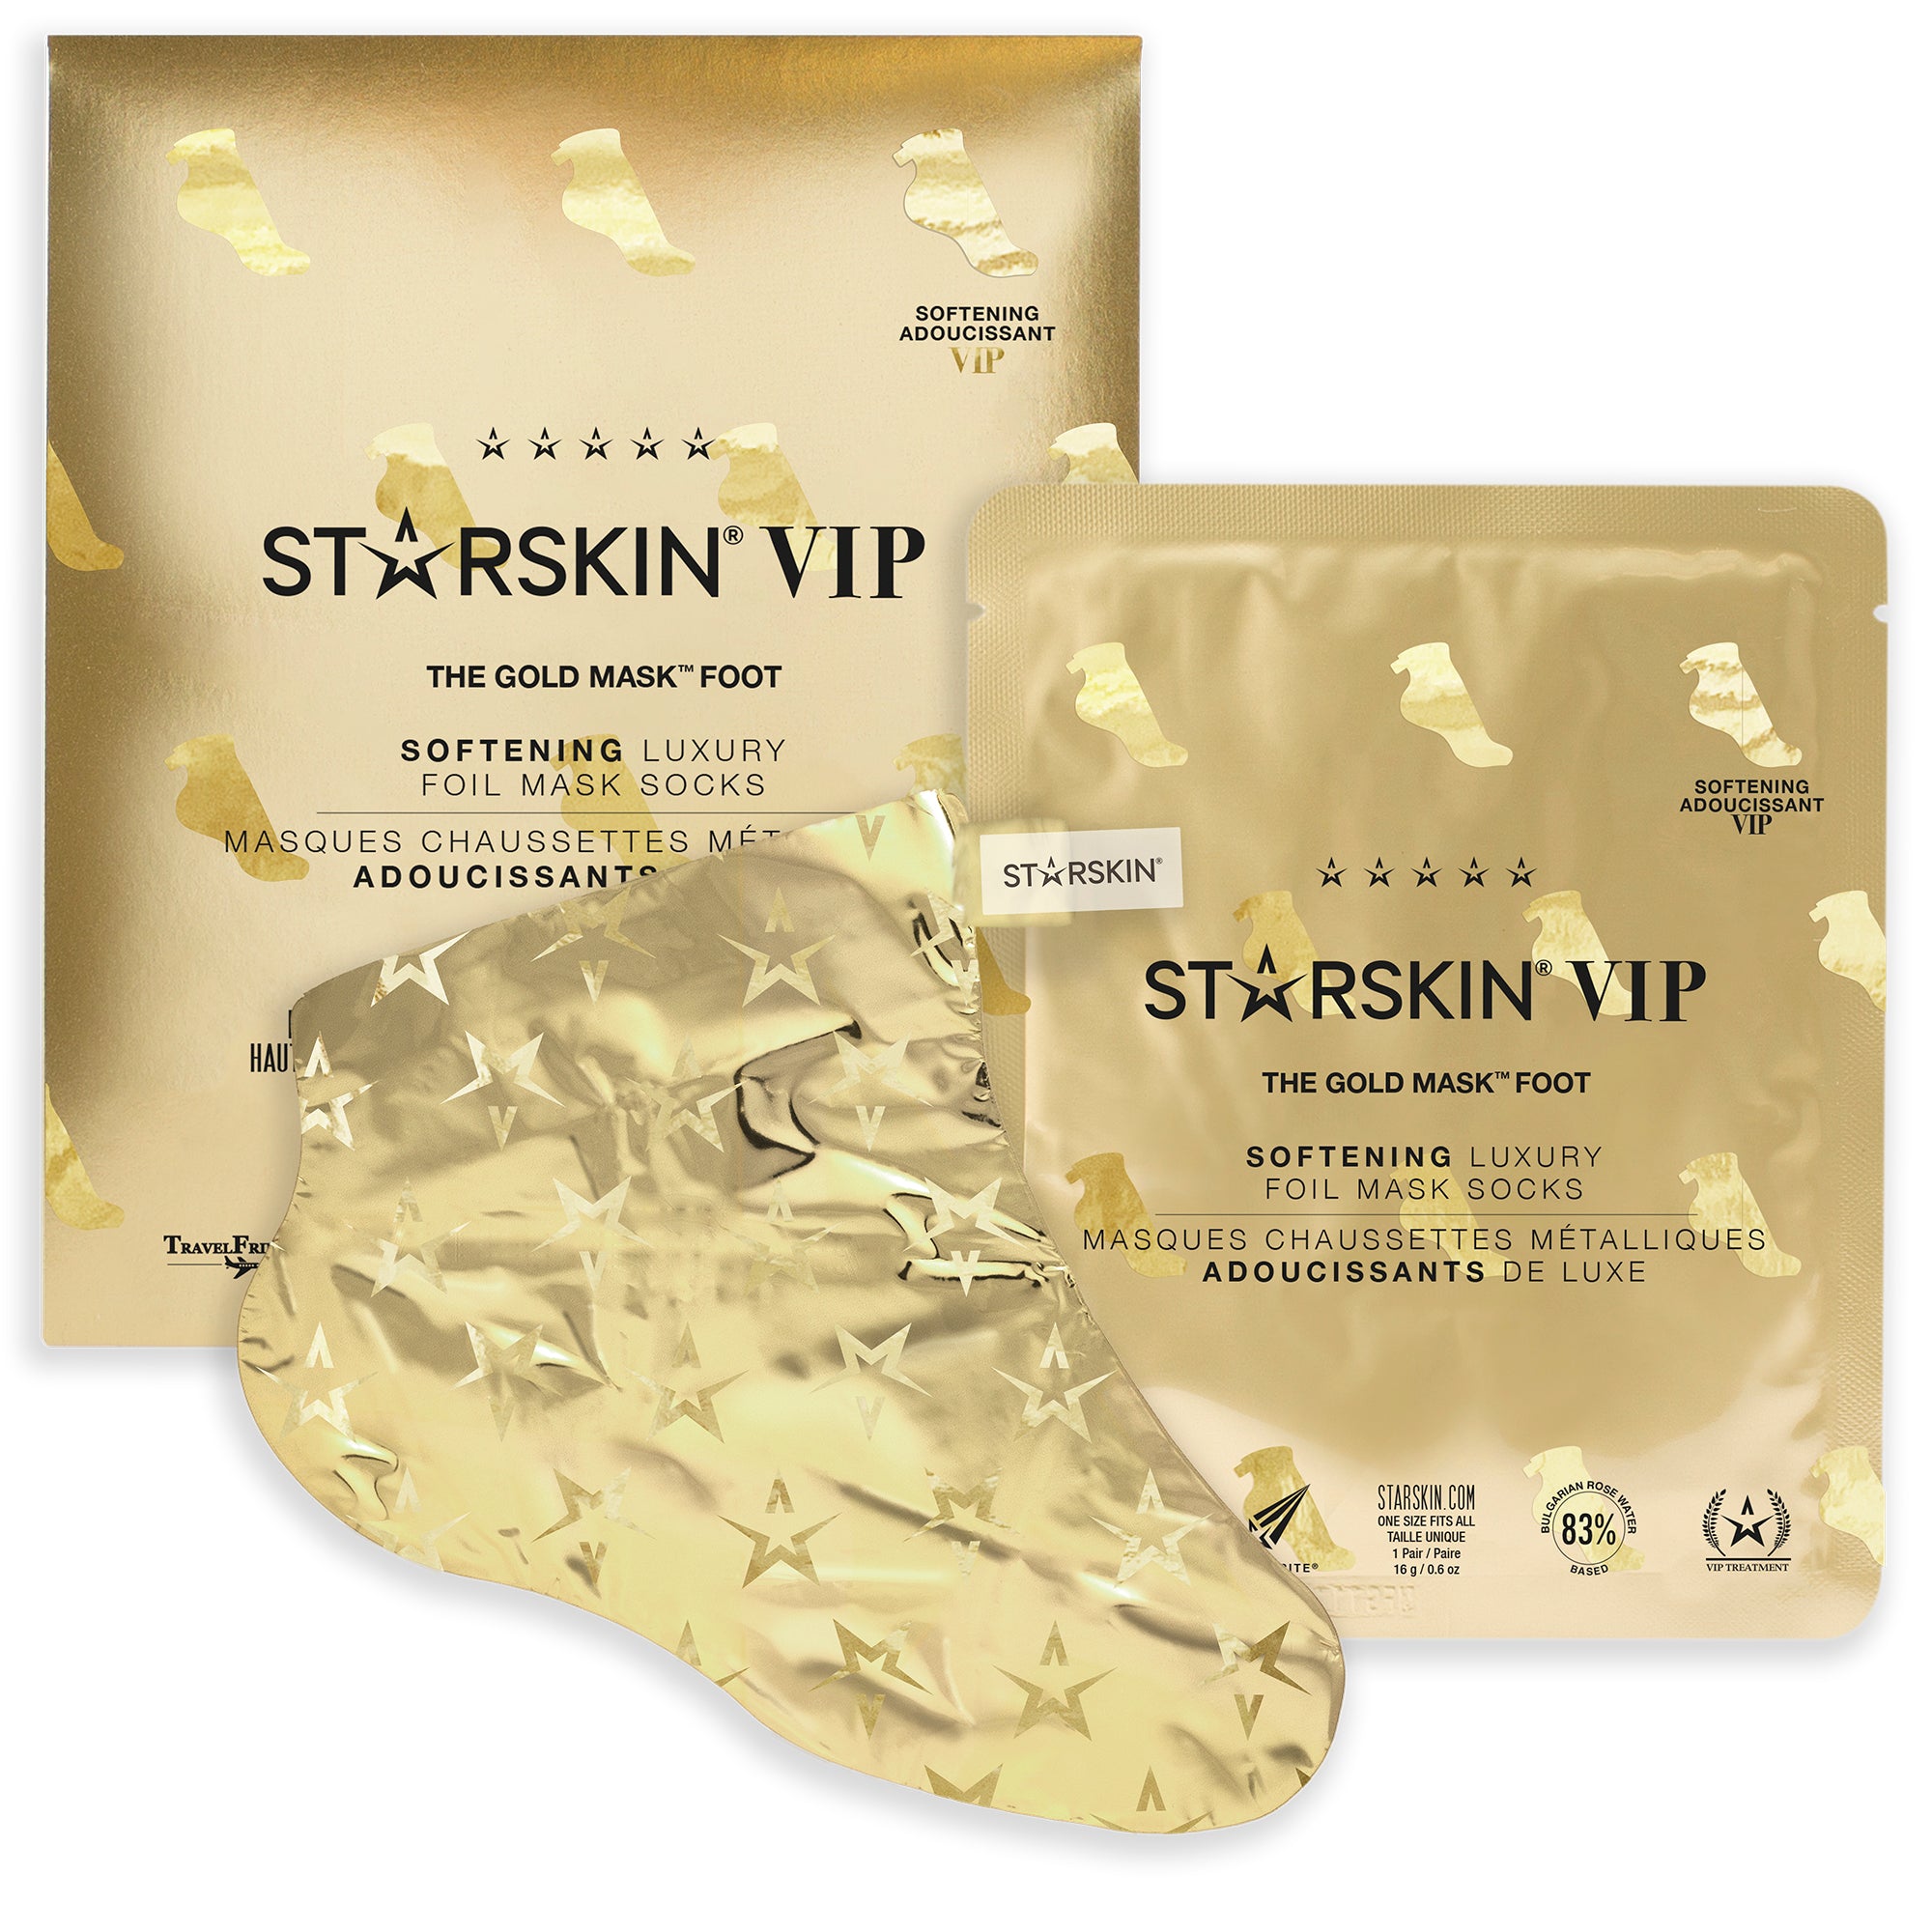 The VIP Gold Mask Foot from Starskin being showcased